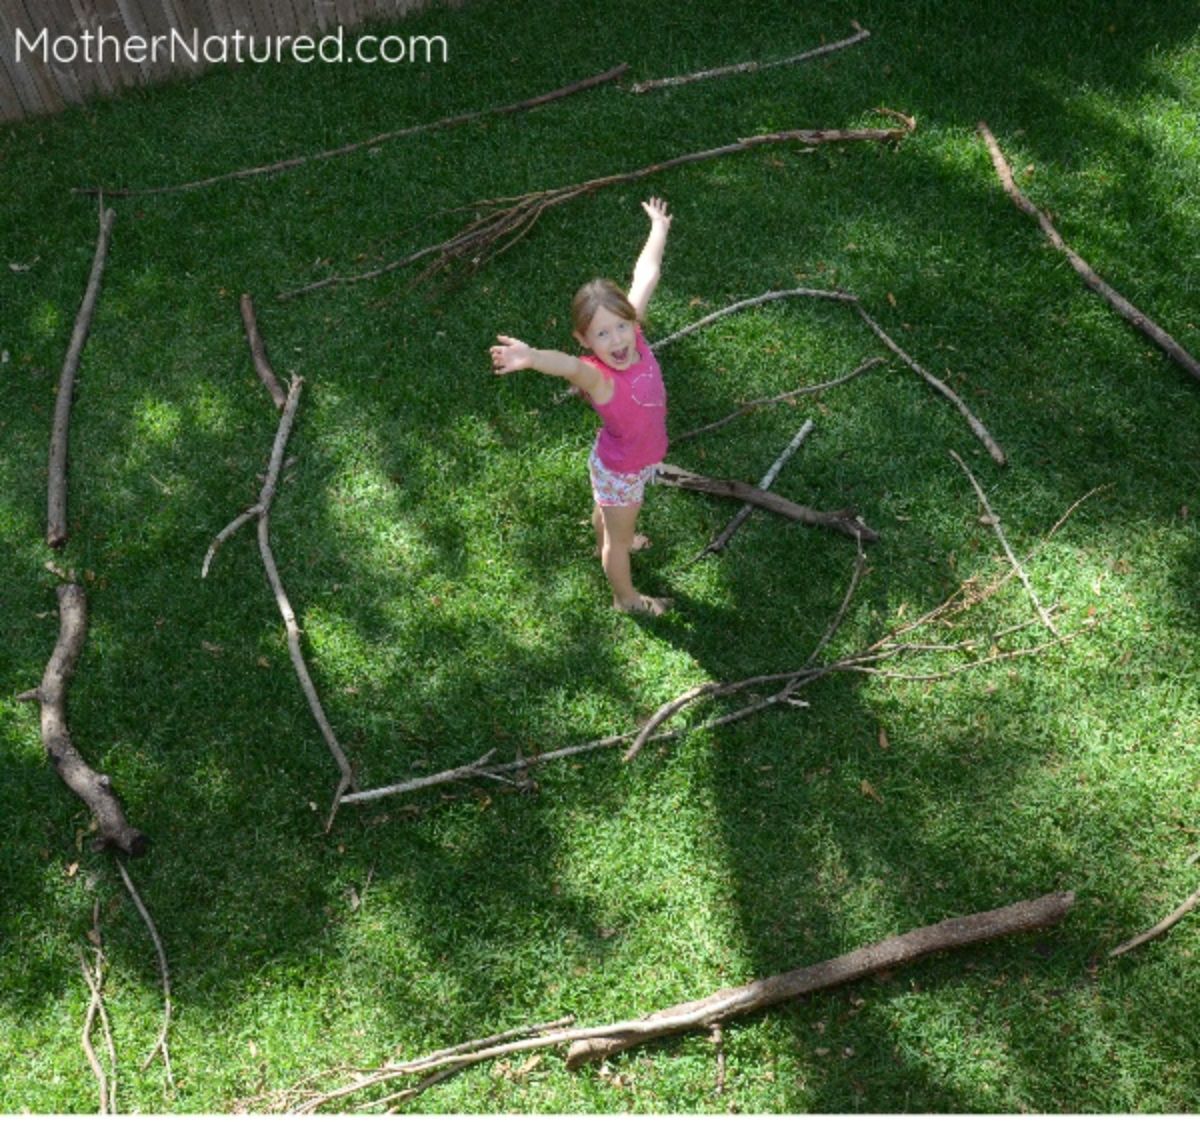 A girl stands in the middle of a patch of grass surrounded by sticks laid out in a maze